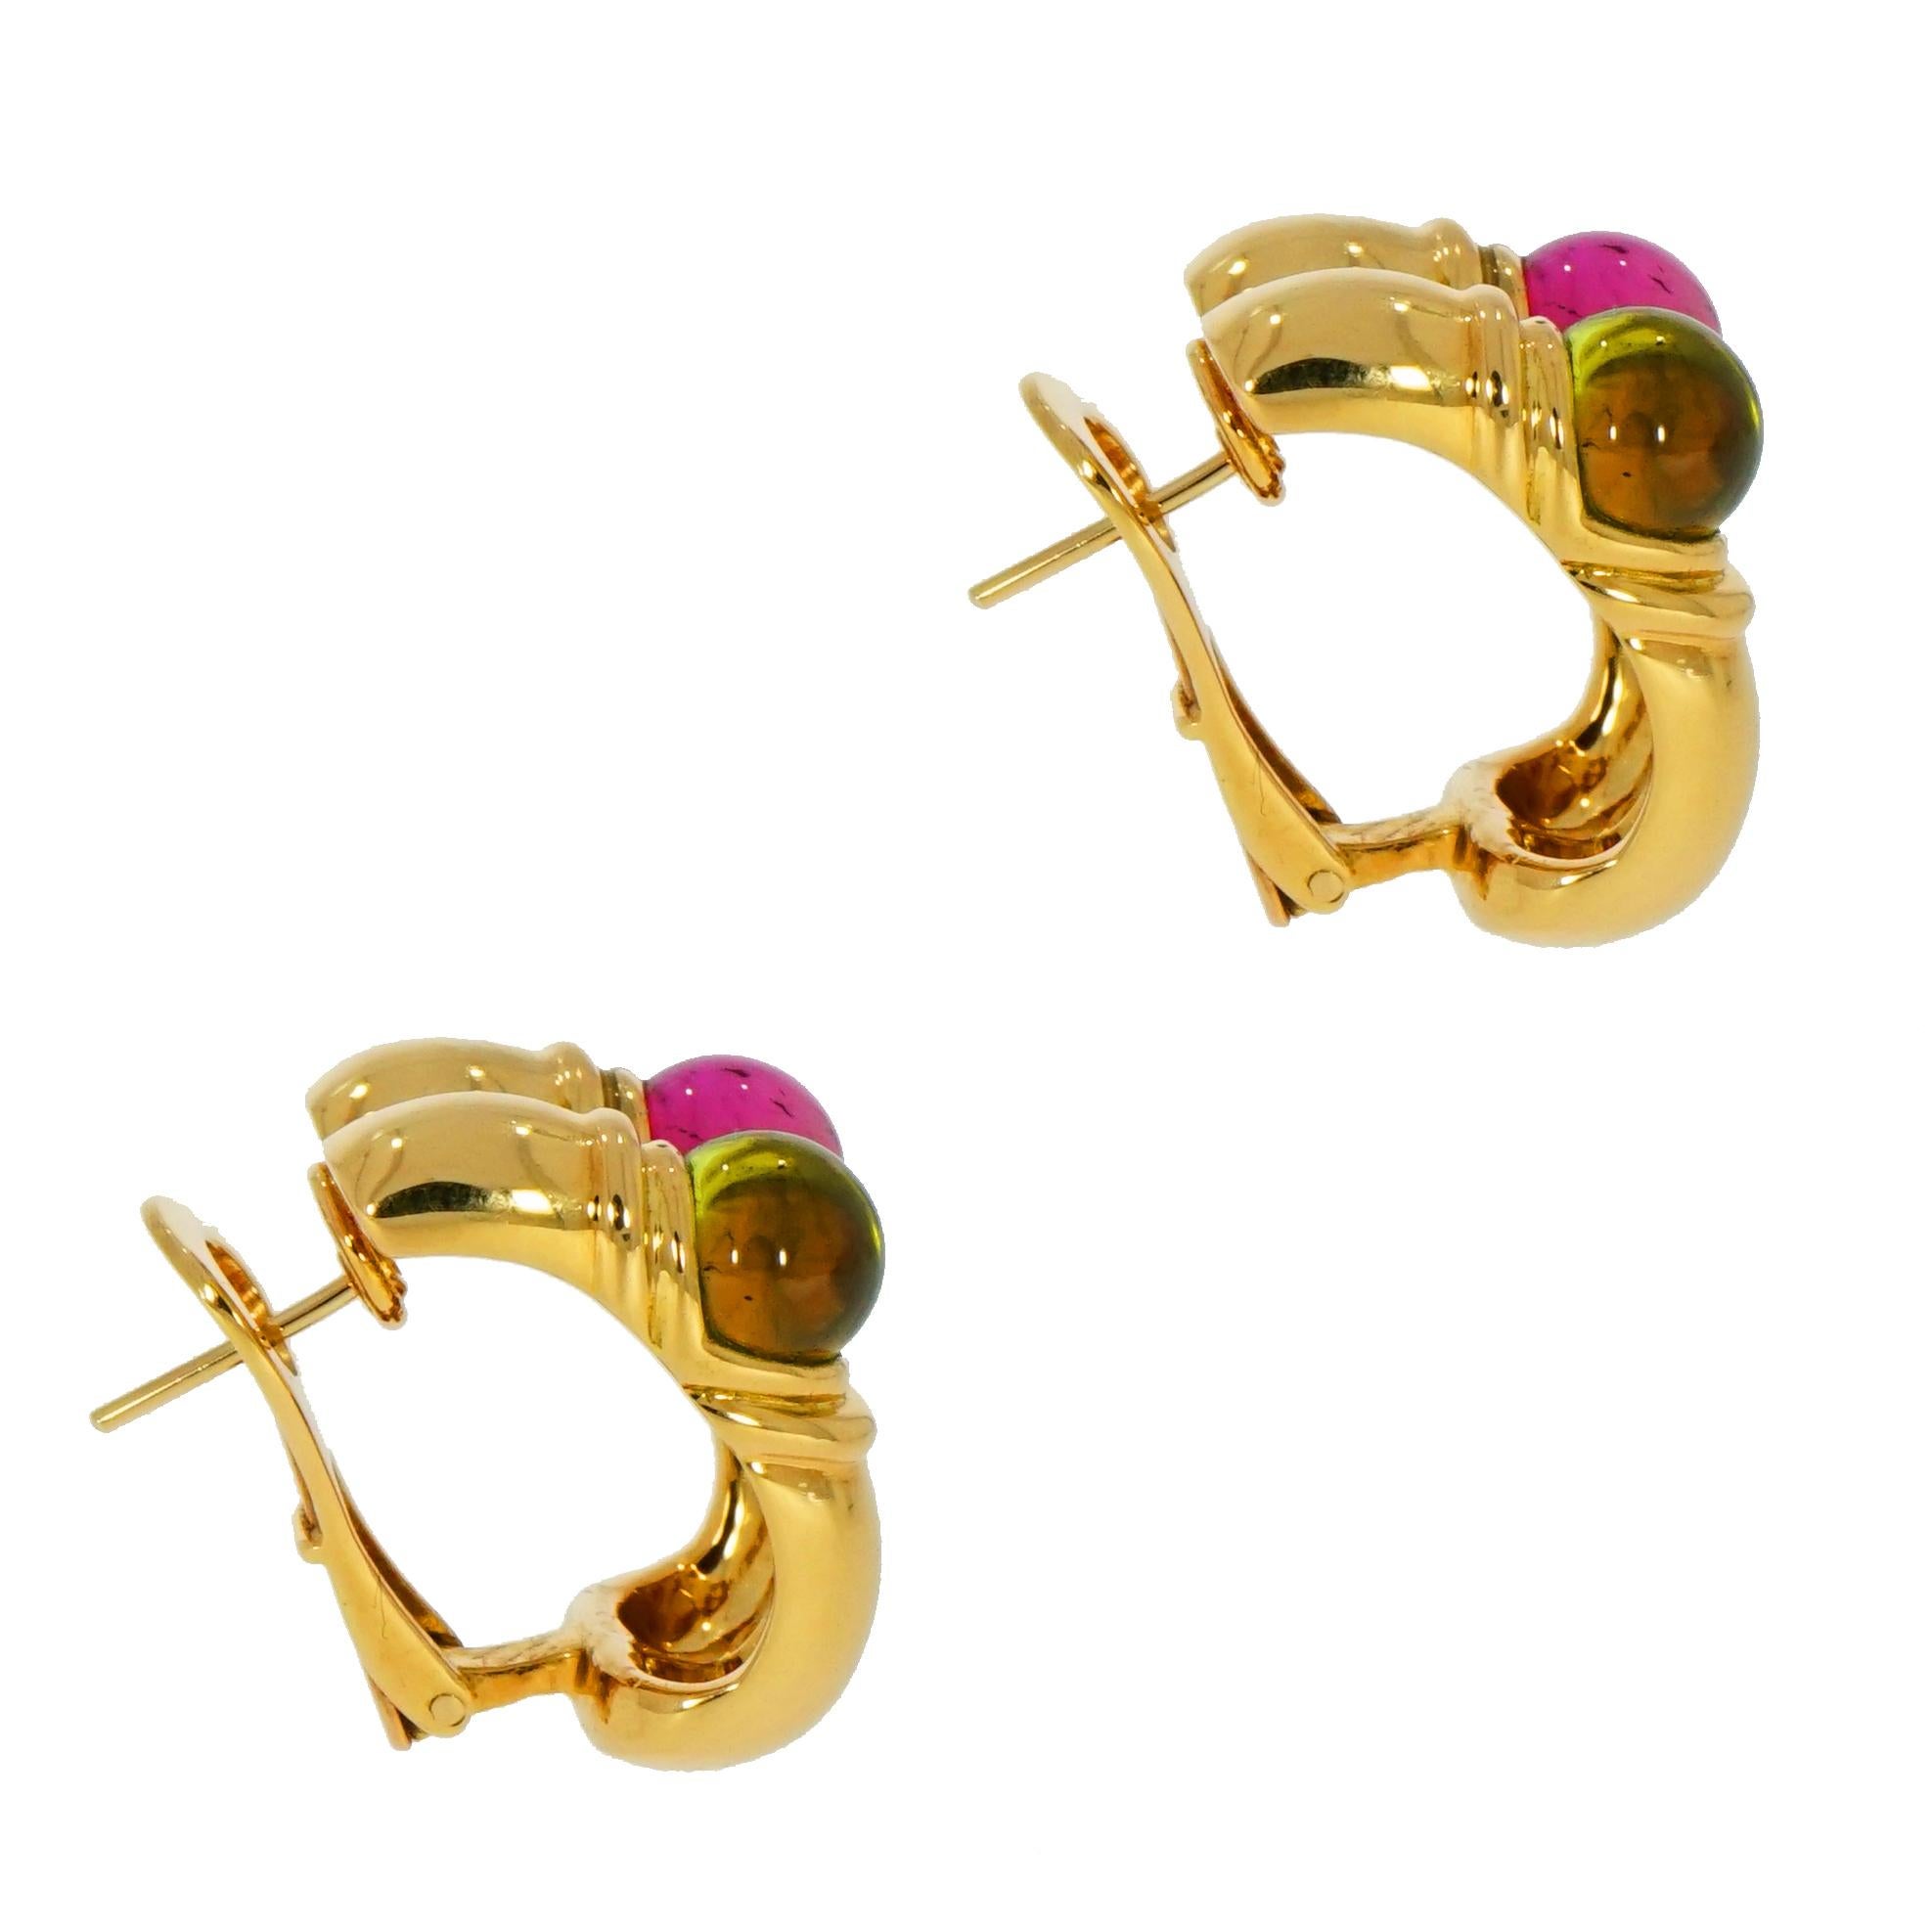 This is an authentic pair of earrings from Bvlgari, crafted in 18k yellow gold with a fine polished finish.
These earrings has a long open curved shape with a pair of round cabochon cut pink and green tourmaline mounted into the gold frame.
Comes